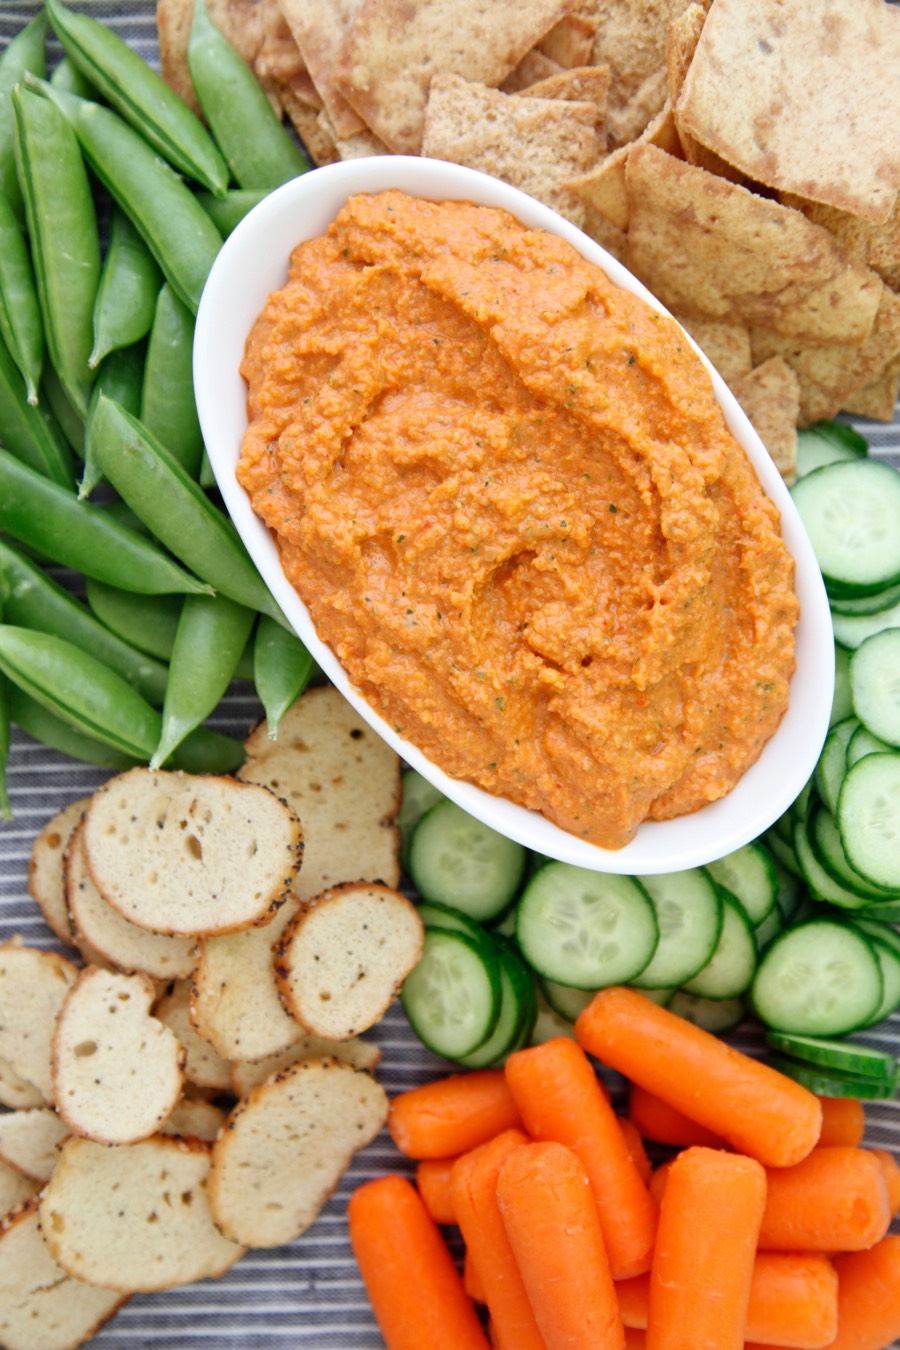 Roasted Red Pepper Almond Dip from Weelicious